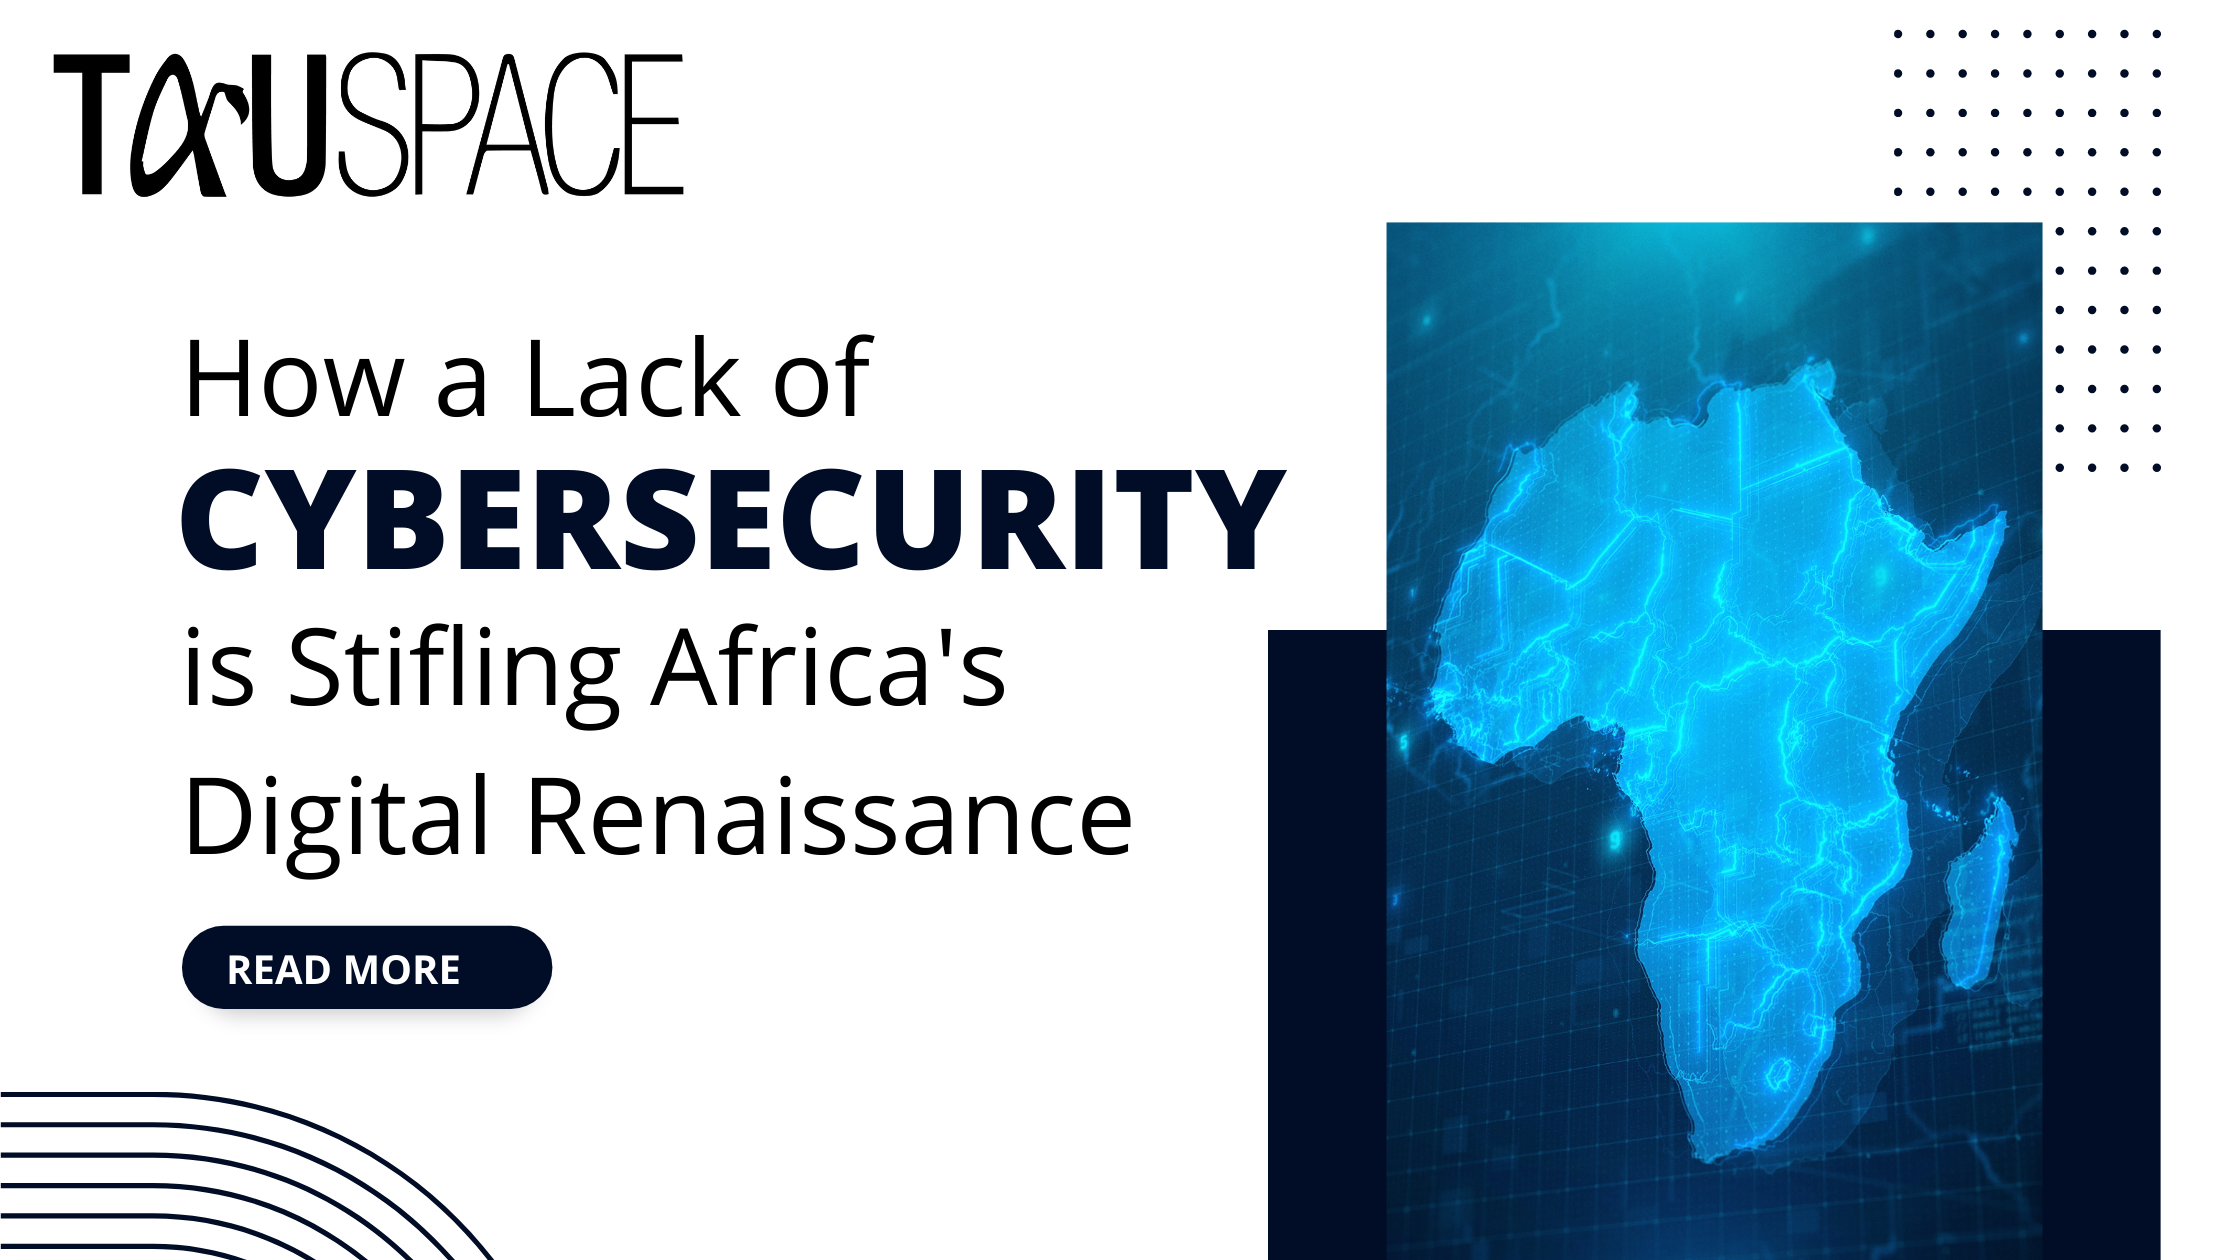 How a Lack of Cybersecurity is Stifling Africa’s Digital Renaissance